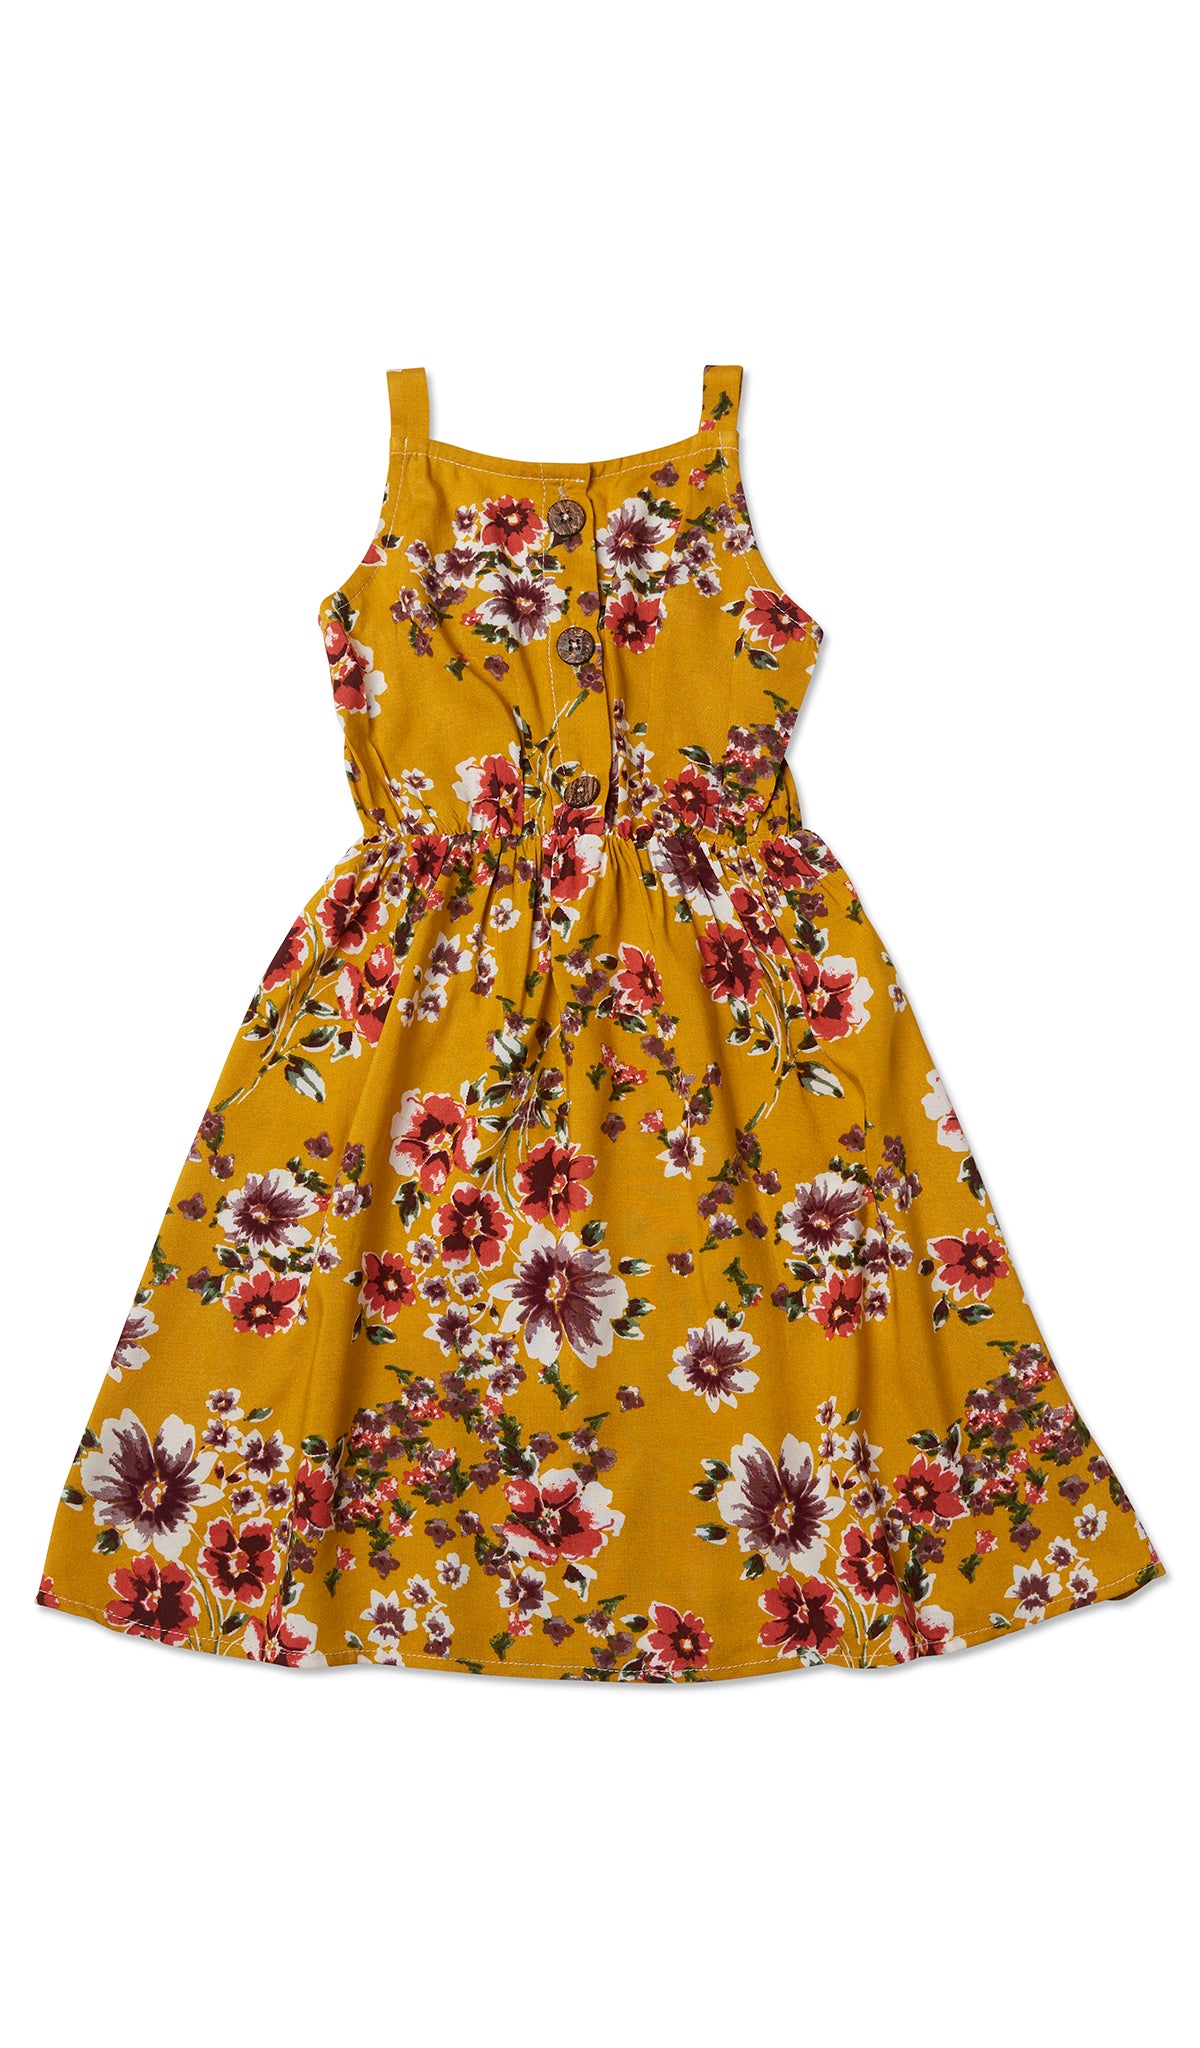 Rust Floral Catalina Kids Dress flat shot of dress showing shoulder straps and elasticated empire waist with all over floral print.